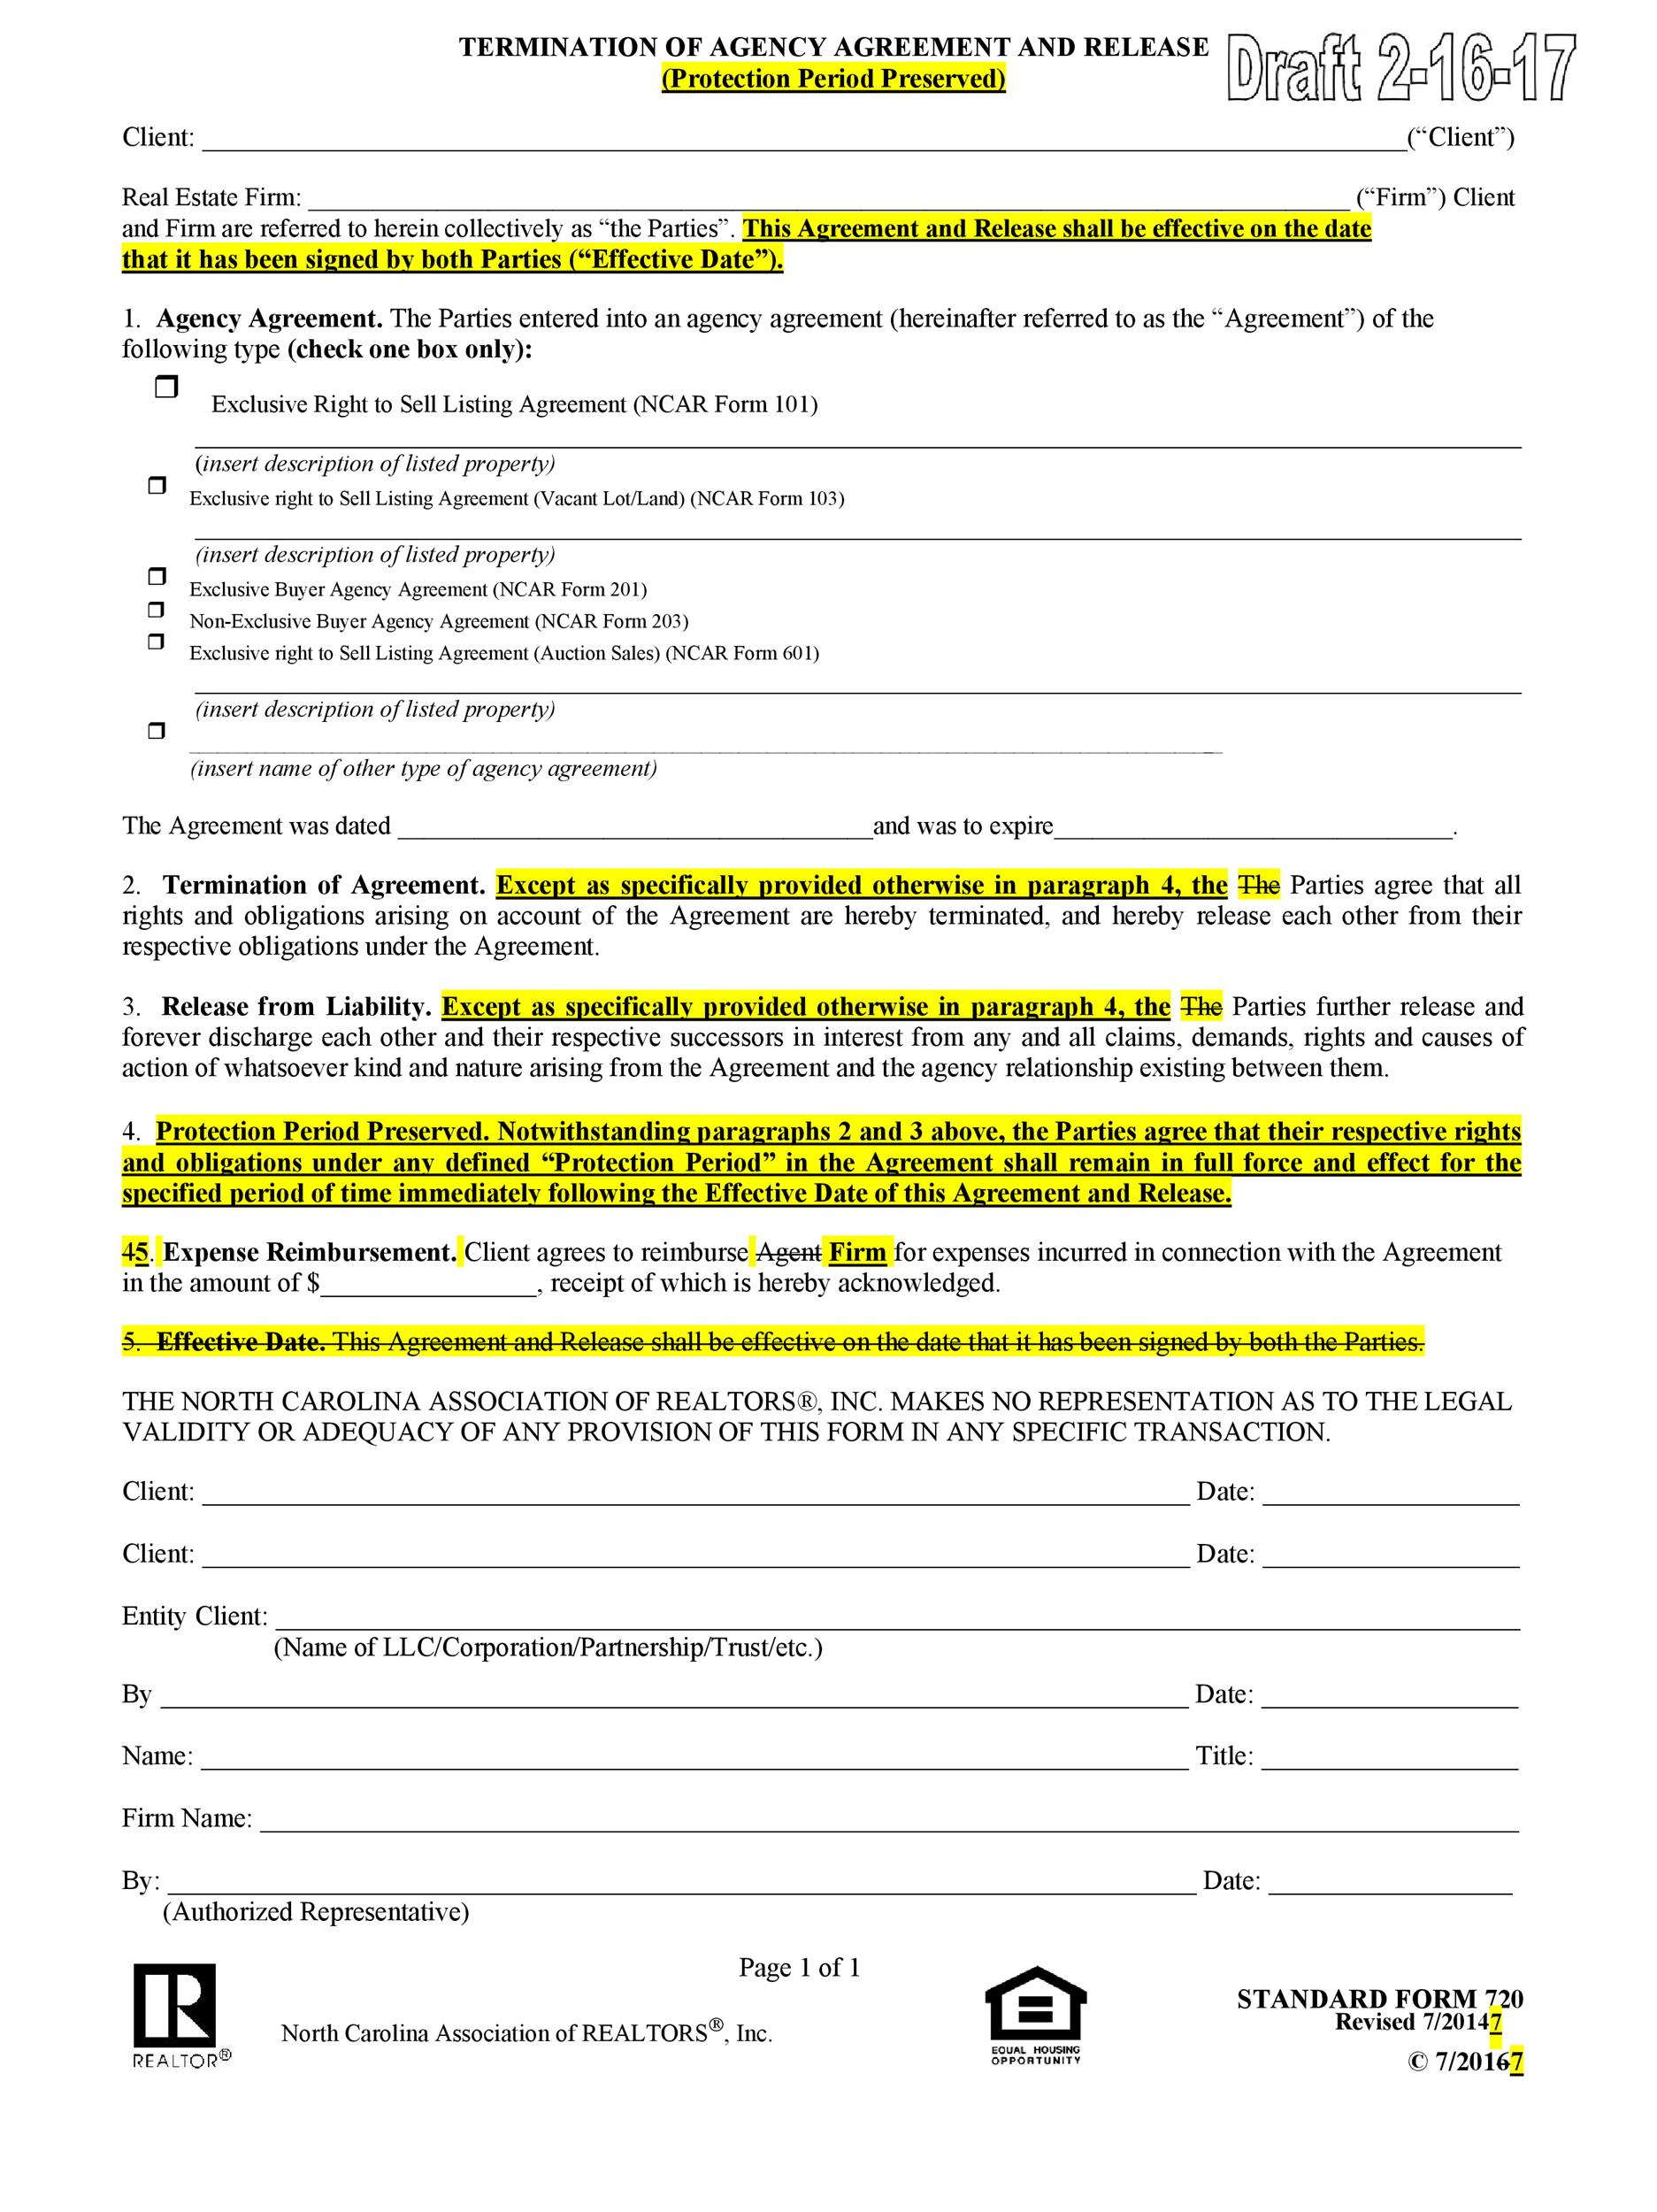 50 Free Agency Agreement Templates MS Word TemplateLab